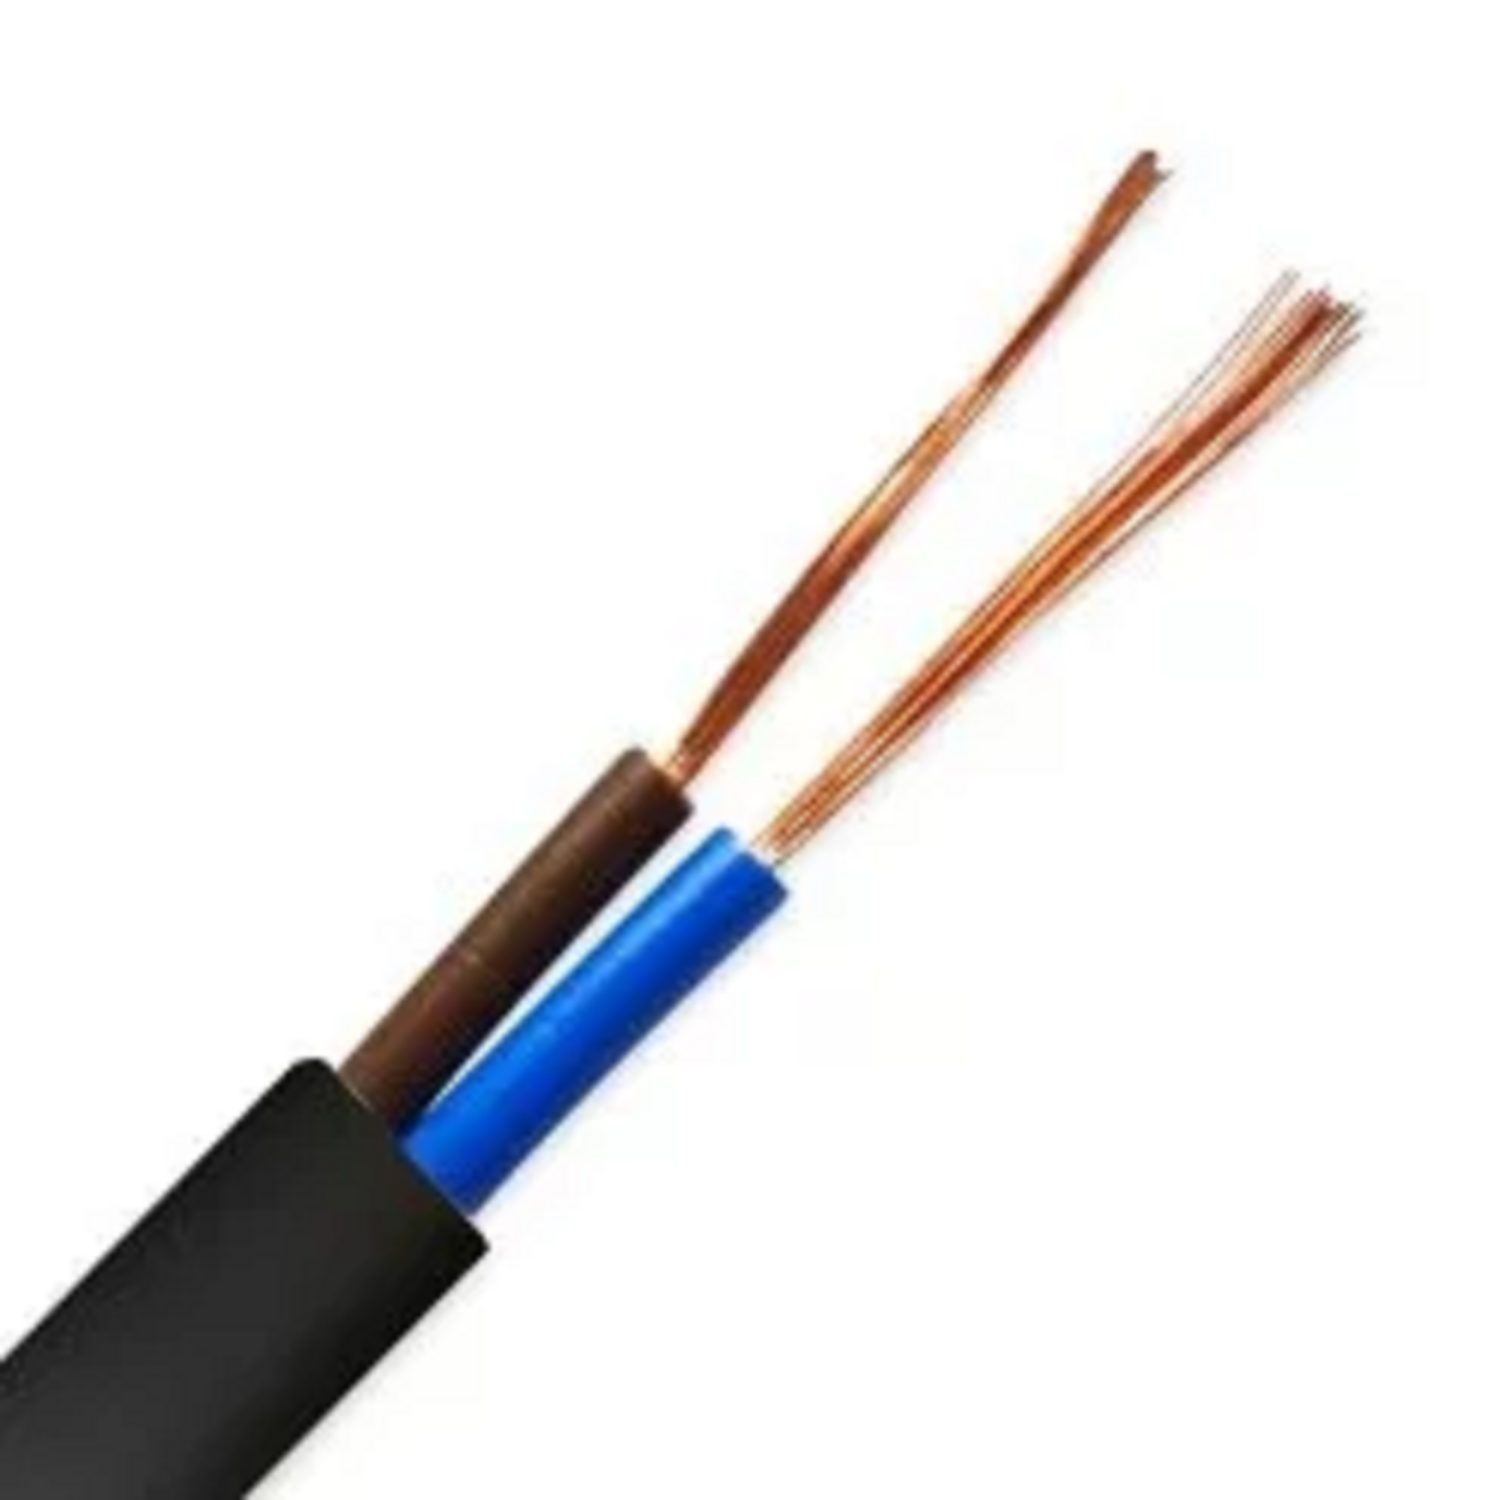 0.5 Sqmm Finolex Copper Flexible Cable With PVC Insulated For Domestic 38 Industrial Uses